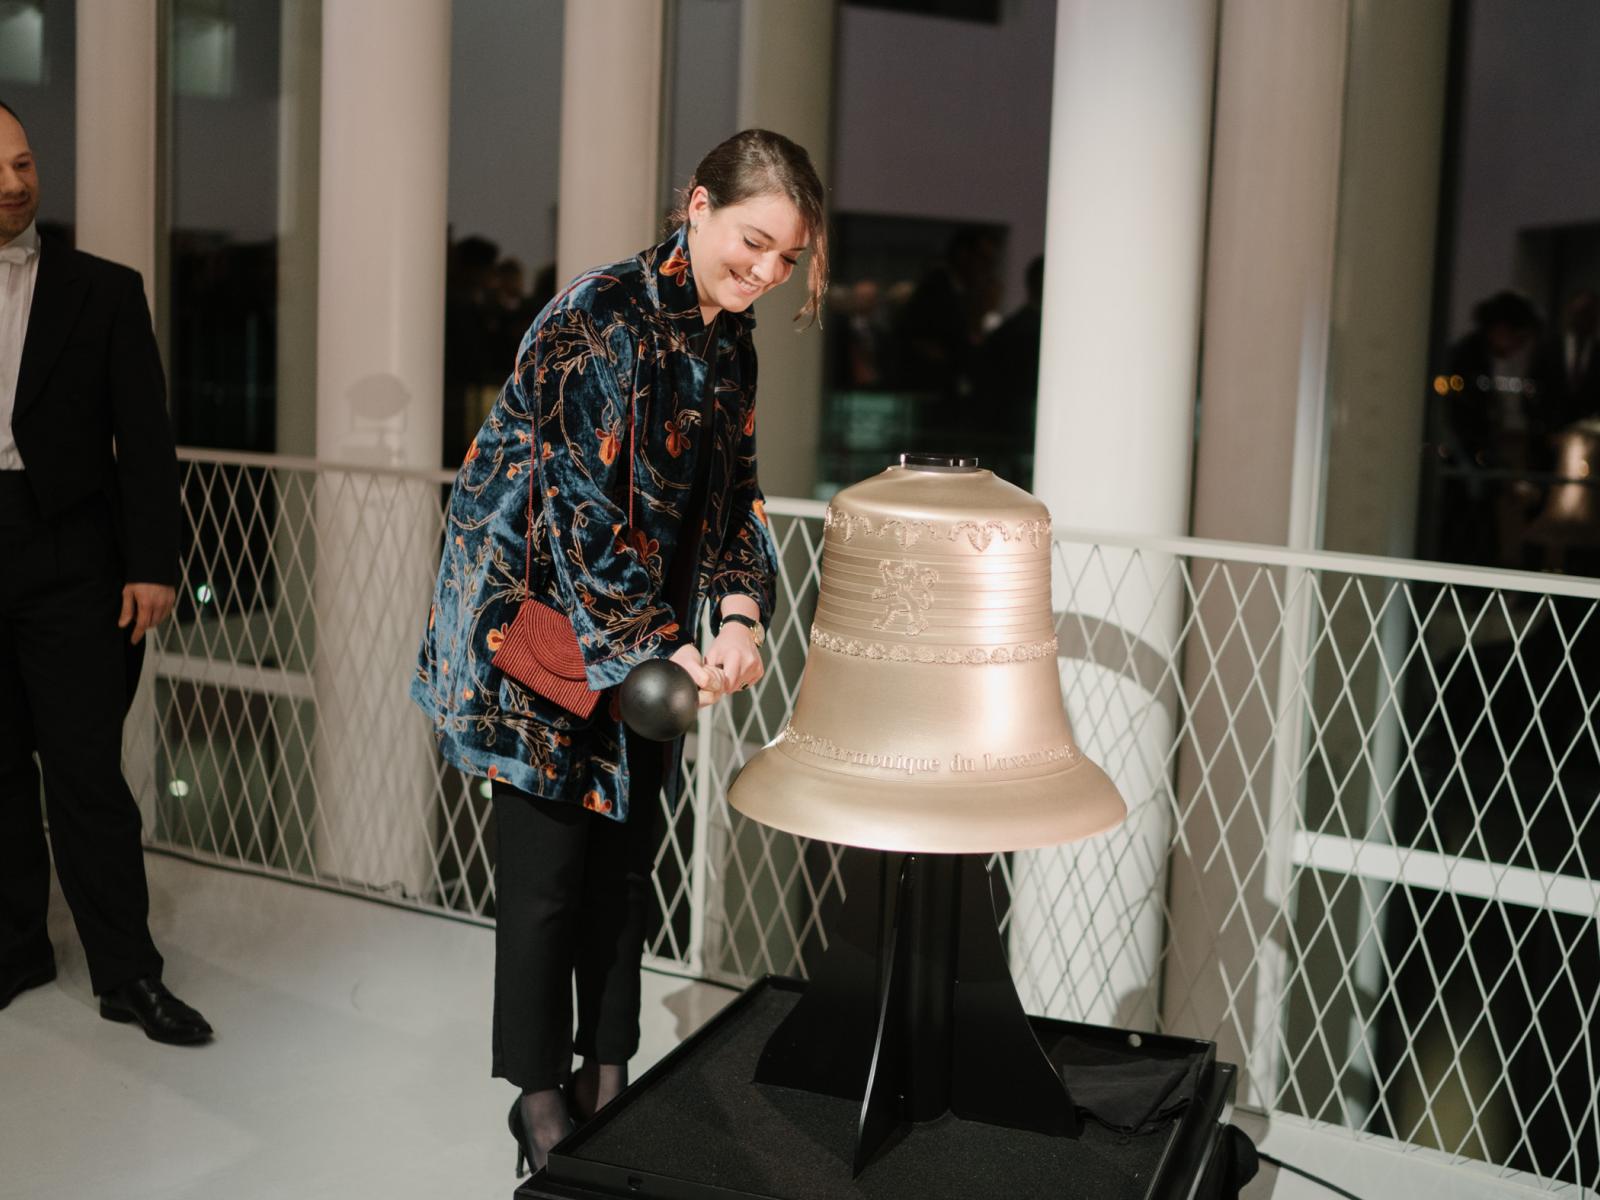 Baptism of the bell of the Orchestre Philharmonique de Luxembourg